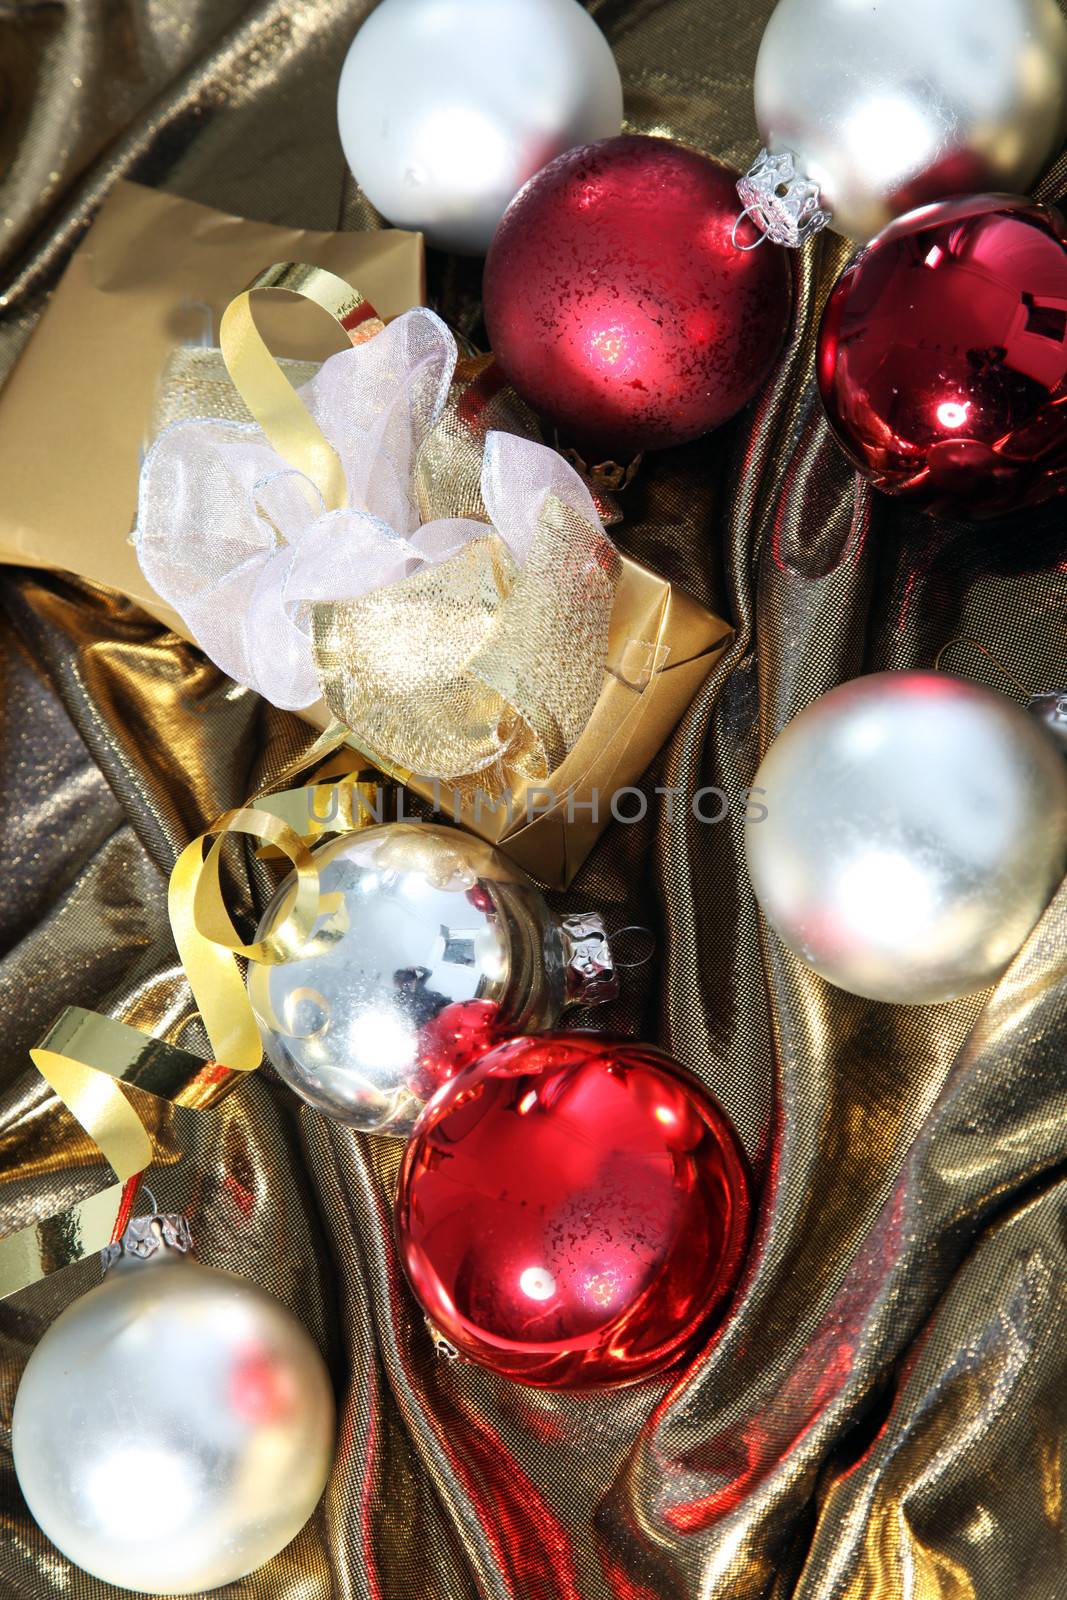 Shiny red and silver Christmas baubles nestling in luxurious gold fabric with a decorative gold wrapped gift box